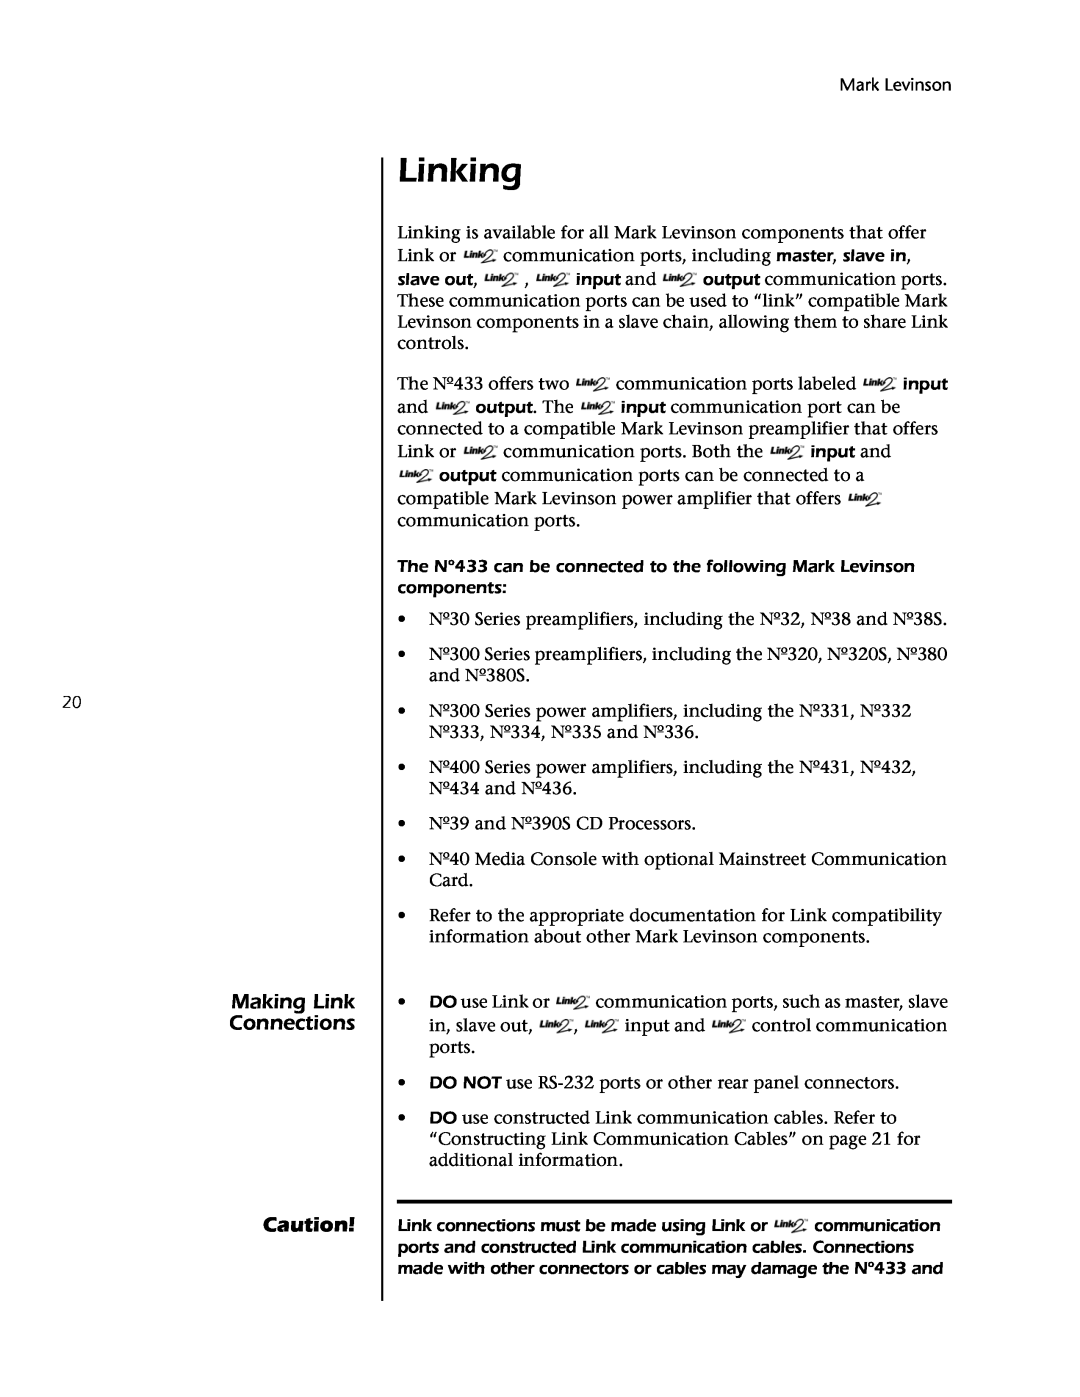 Mark Levinson 433 owner manual Linking, Making Link Connections 